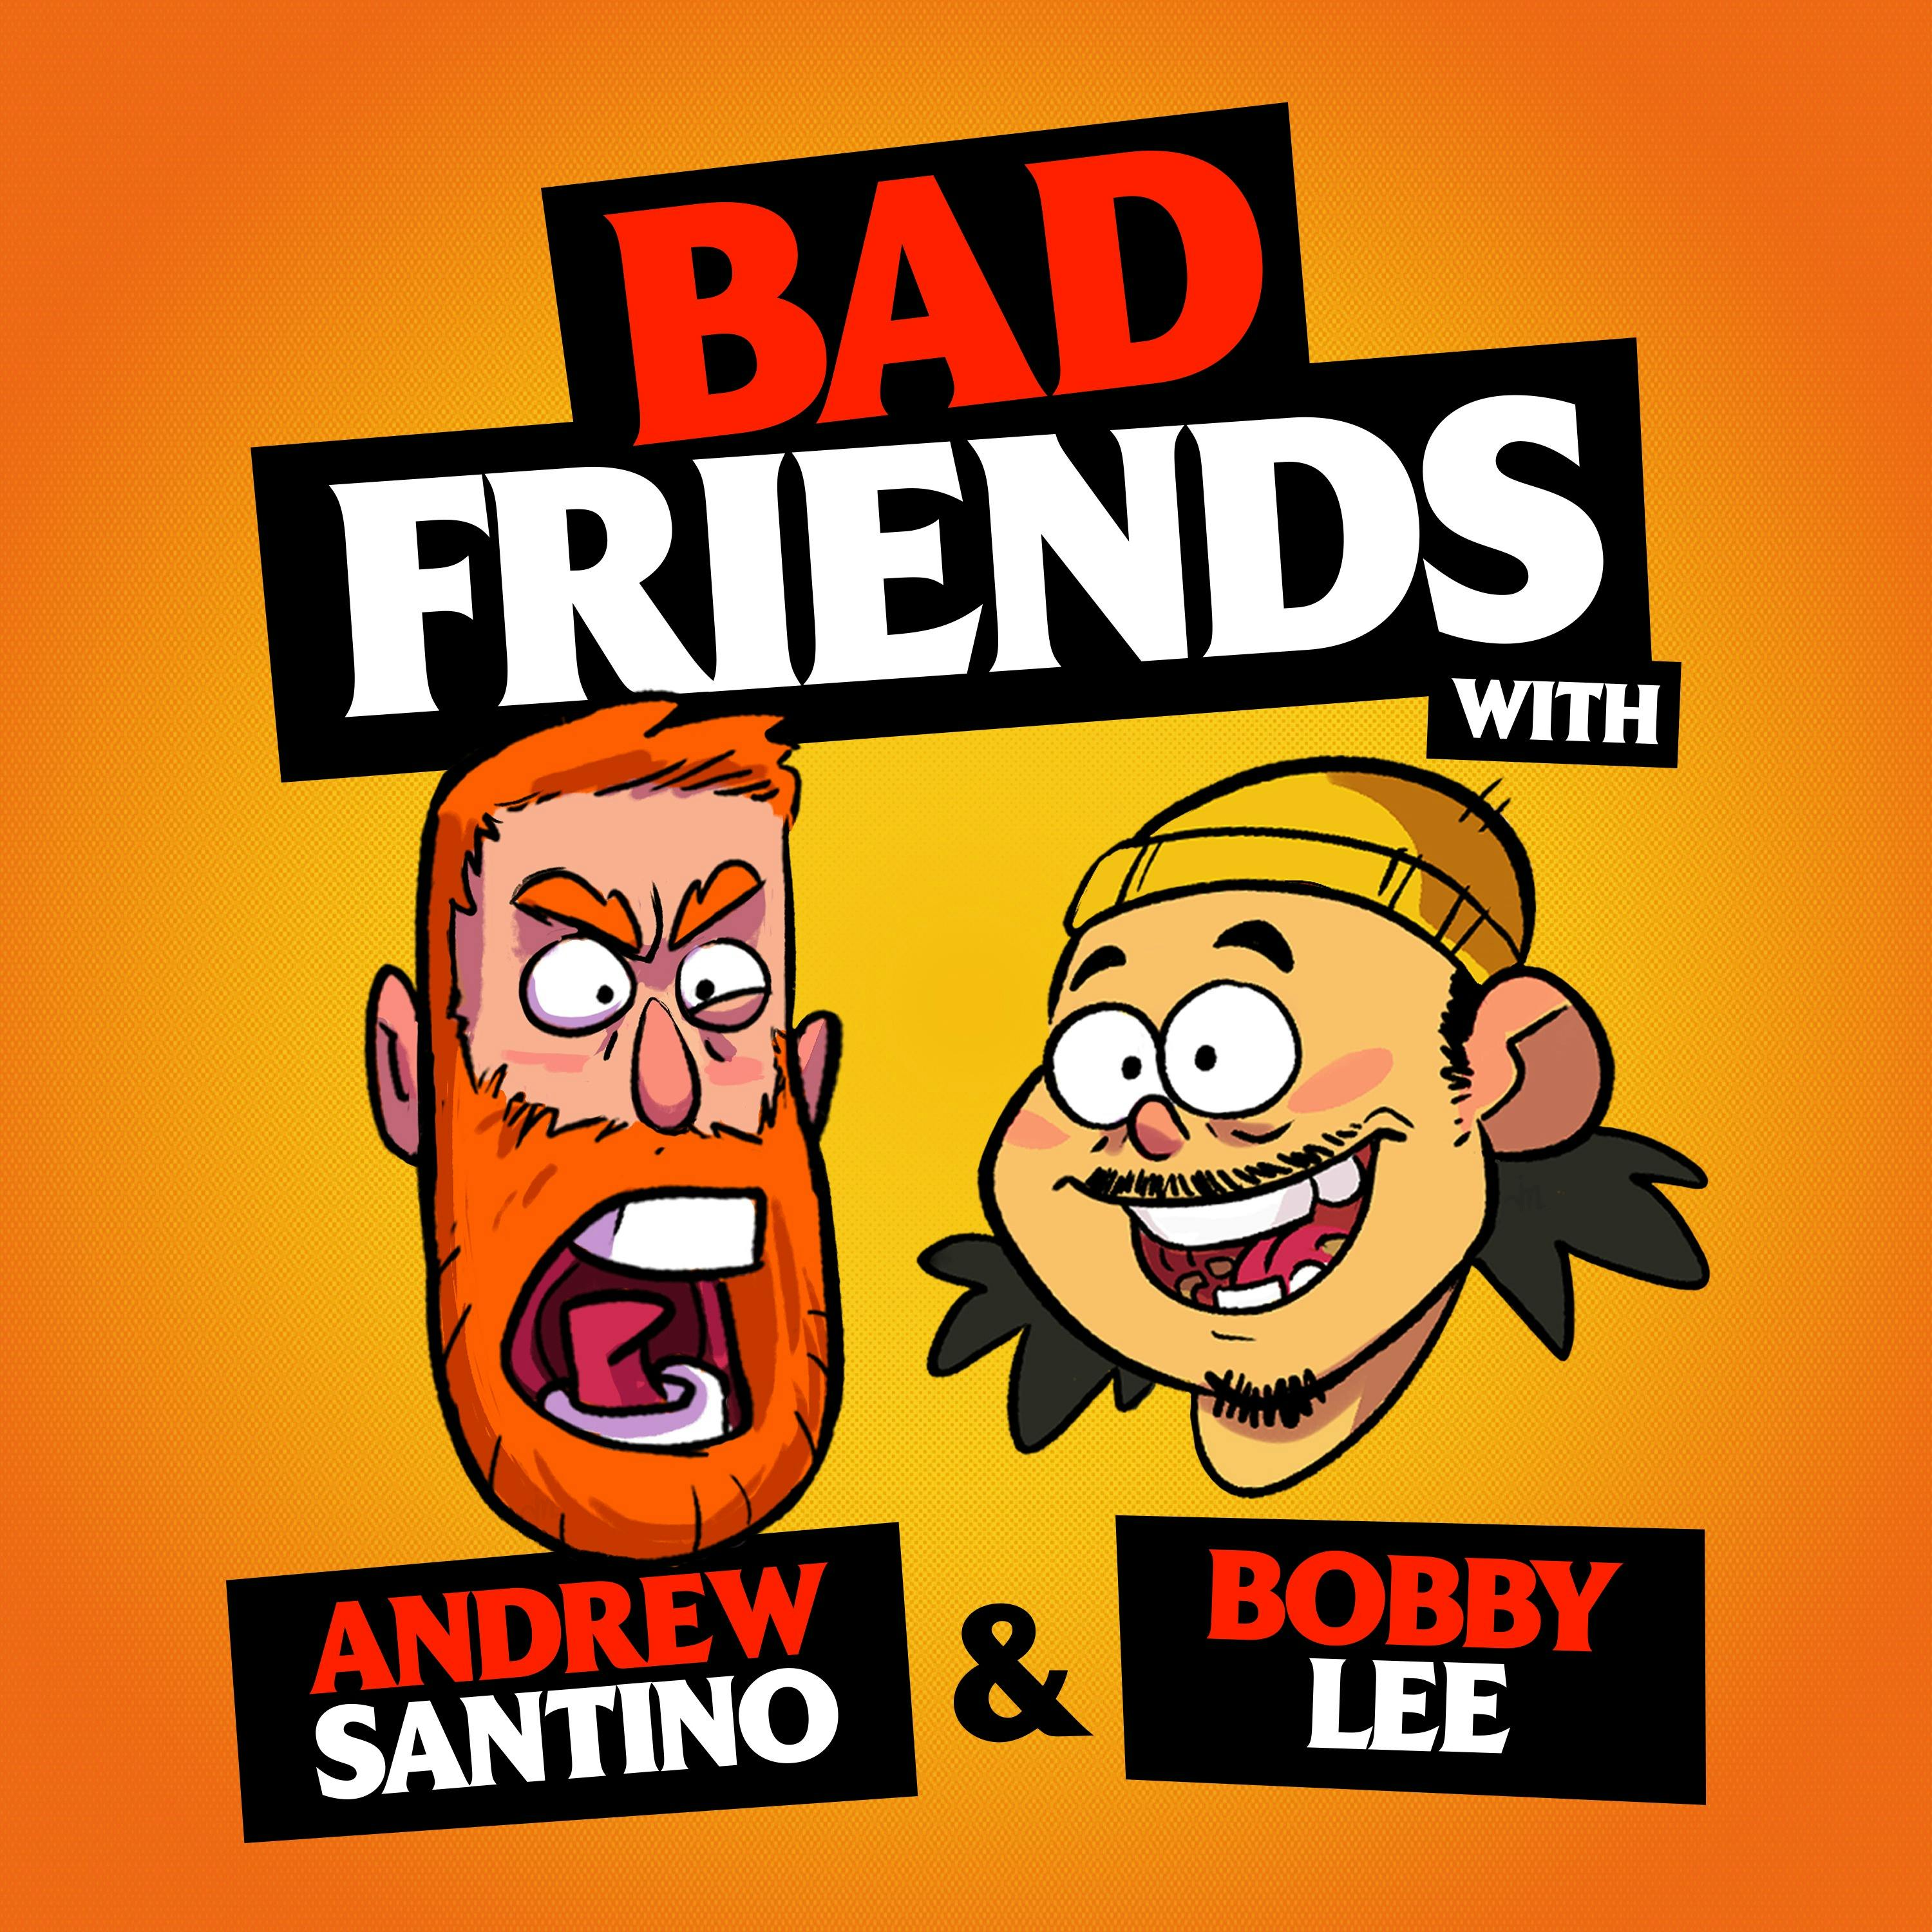 An Alligator and a Robbery by Andrew Santino and Bobby Lee